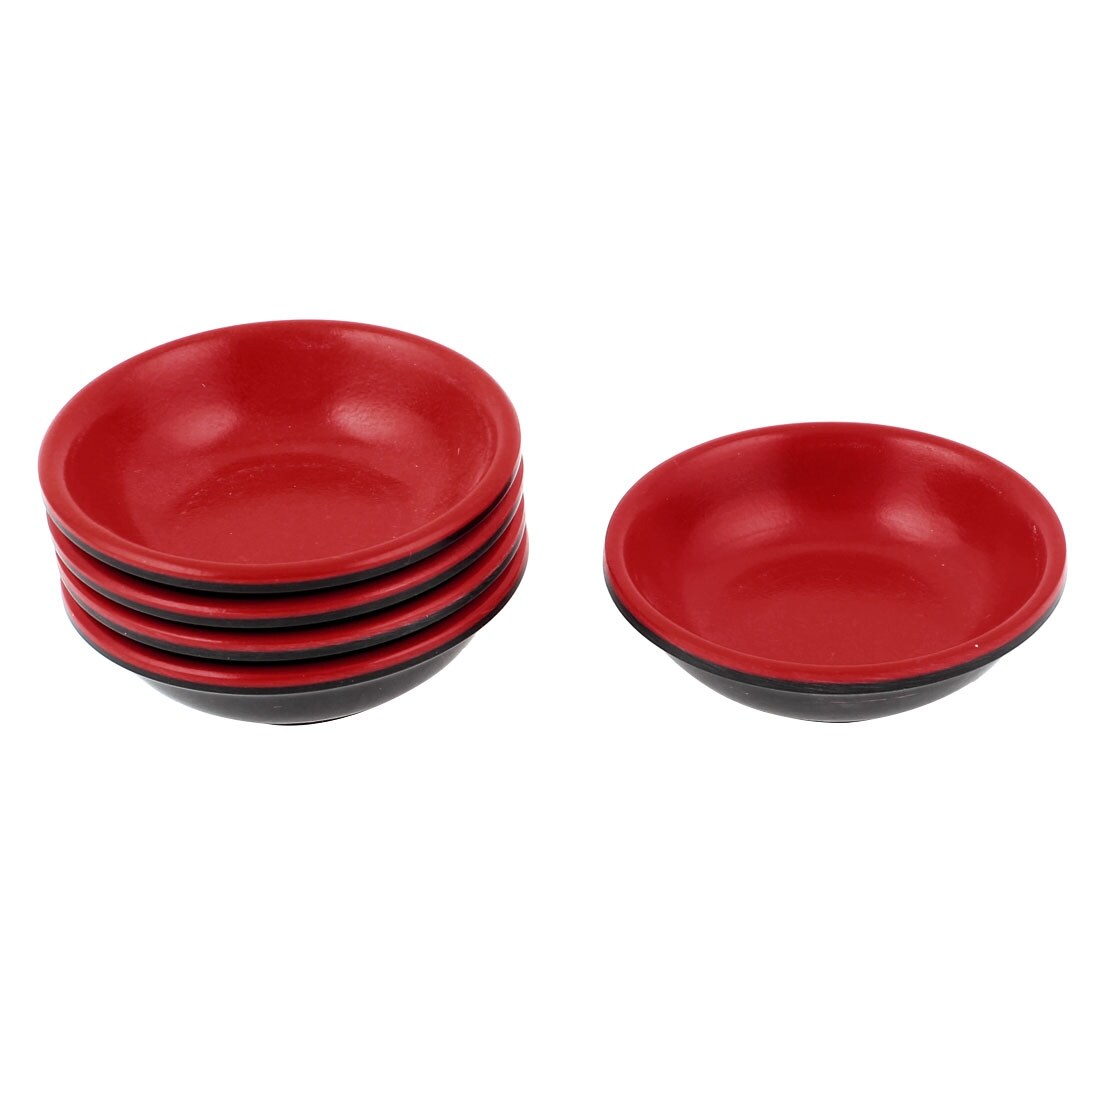 https://ak1.ostkcdn.com/images/products/is/images/direct/a169ef6e03db159ab2f50baece1d1f4bf6d84ee4/Household-Plastic-Round-Sauce-Soy-Dipping-Dish-Bowl-Red-7cm-Dia-5-Pcs.jpg